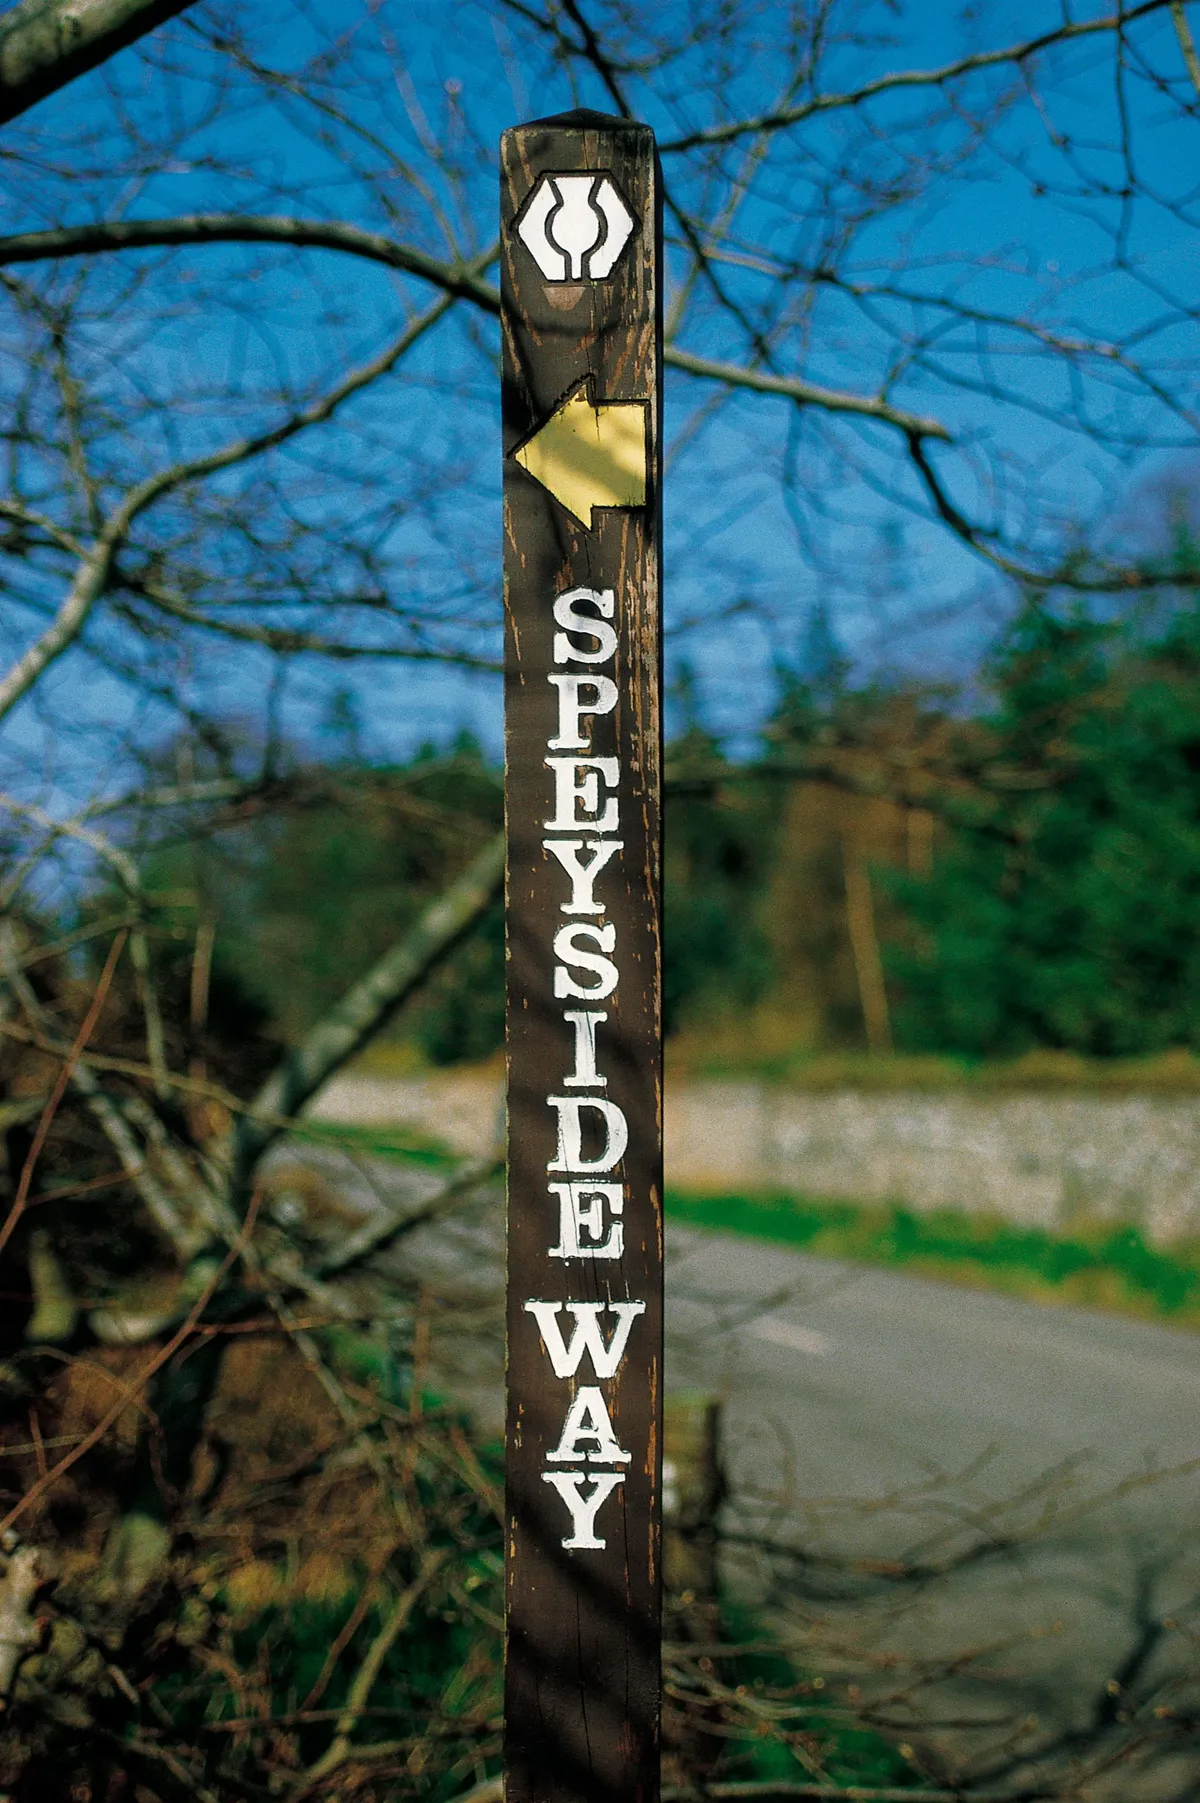 A Sign Post Giving Footpath Directions Of The Speyside Way A Long Distant Designated Walk Following The Course Of The River Spey Opened In 1981 and Now Extending Between Aviemore and Buckie/Credit: VisitScotland, Paul Tomkins